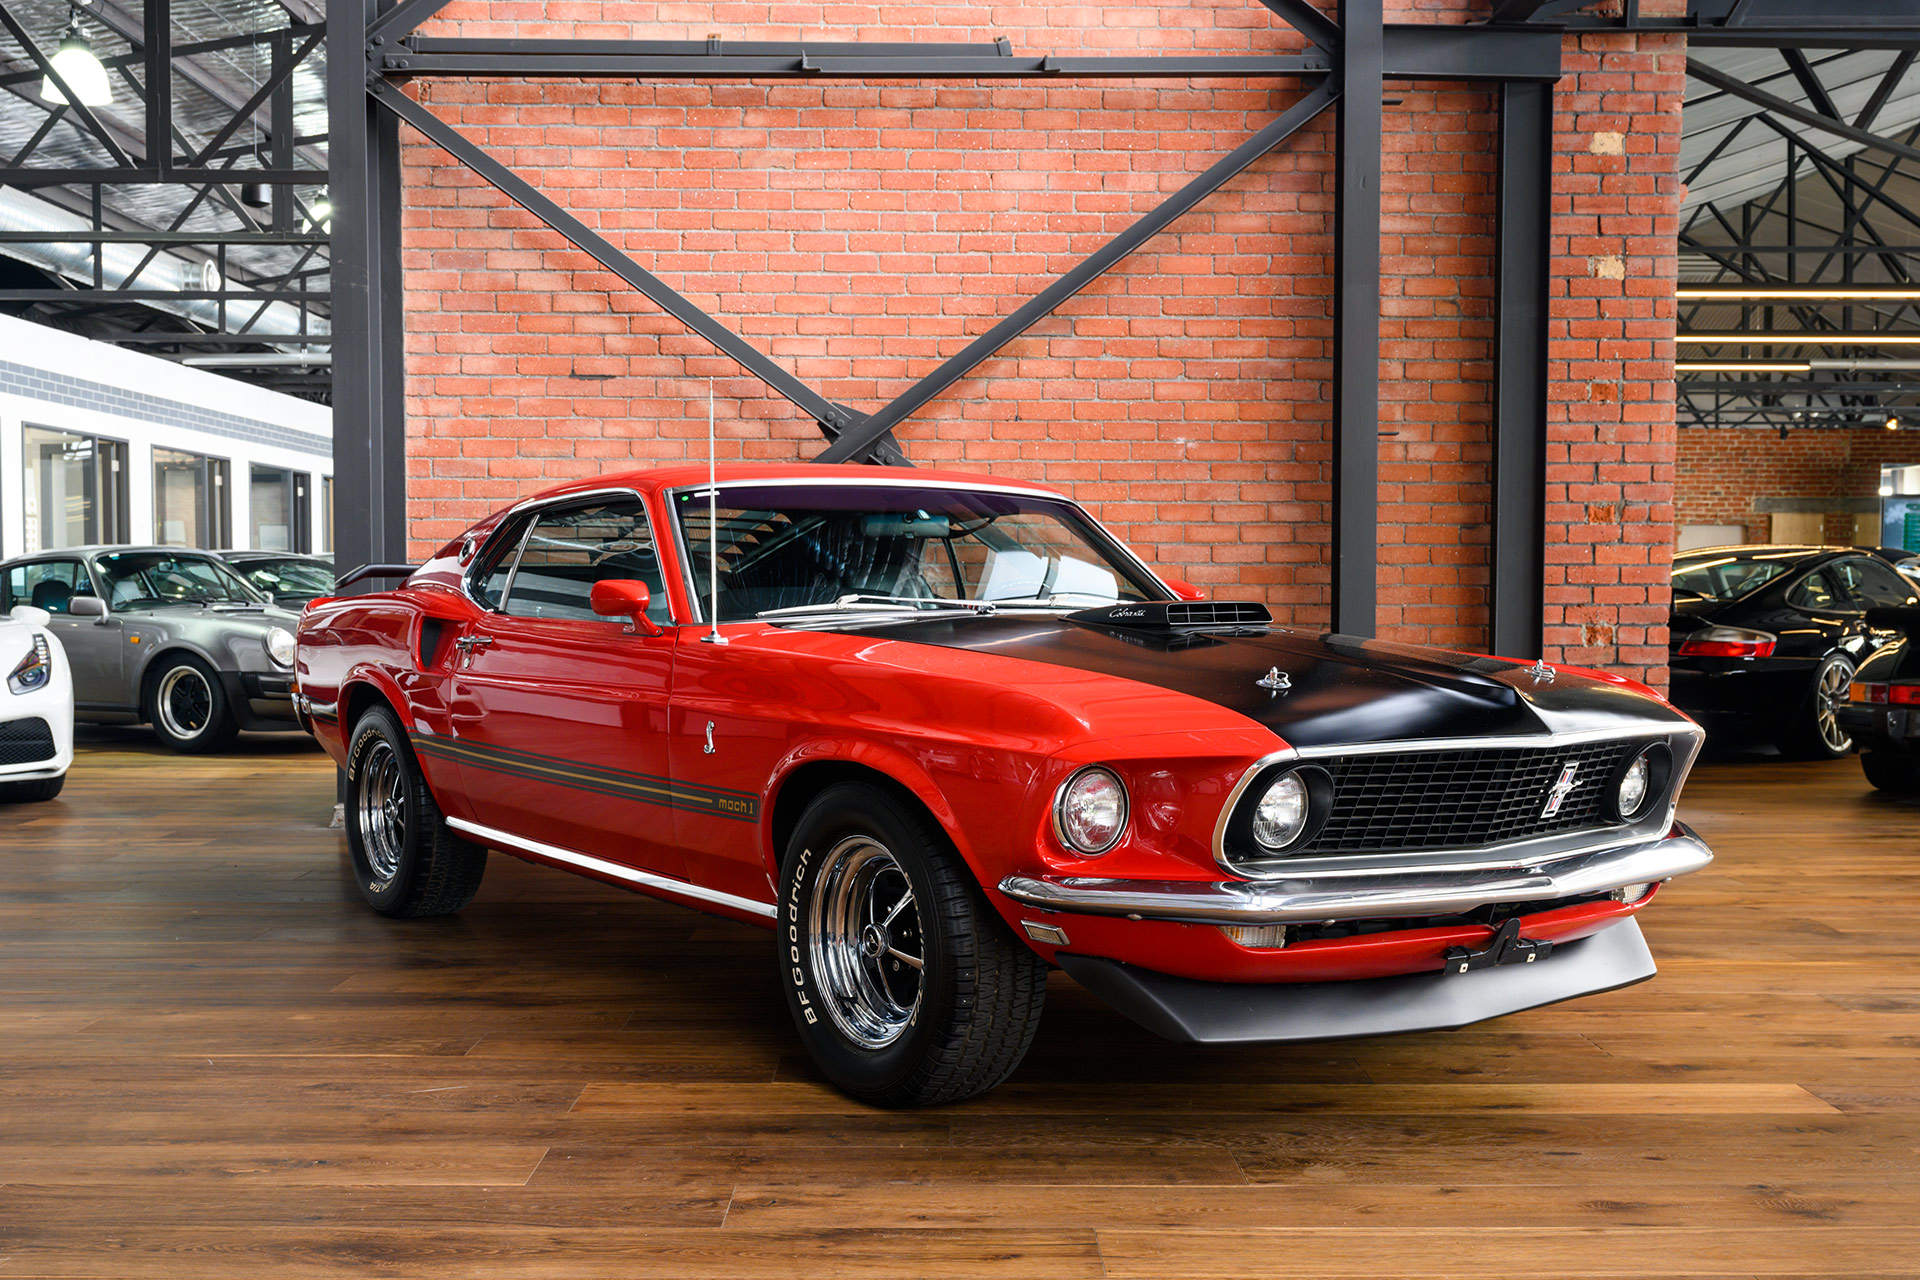 1969 Ford Mustang Mach 1 428 Cobra Jet - Richmonds - Classic and Prestige Cars - Storage and